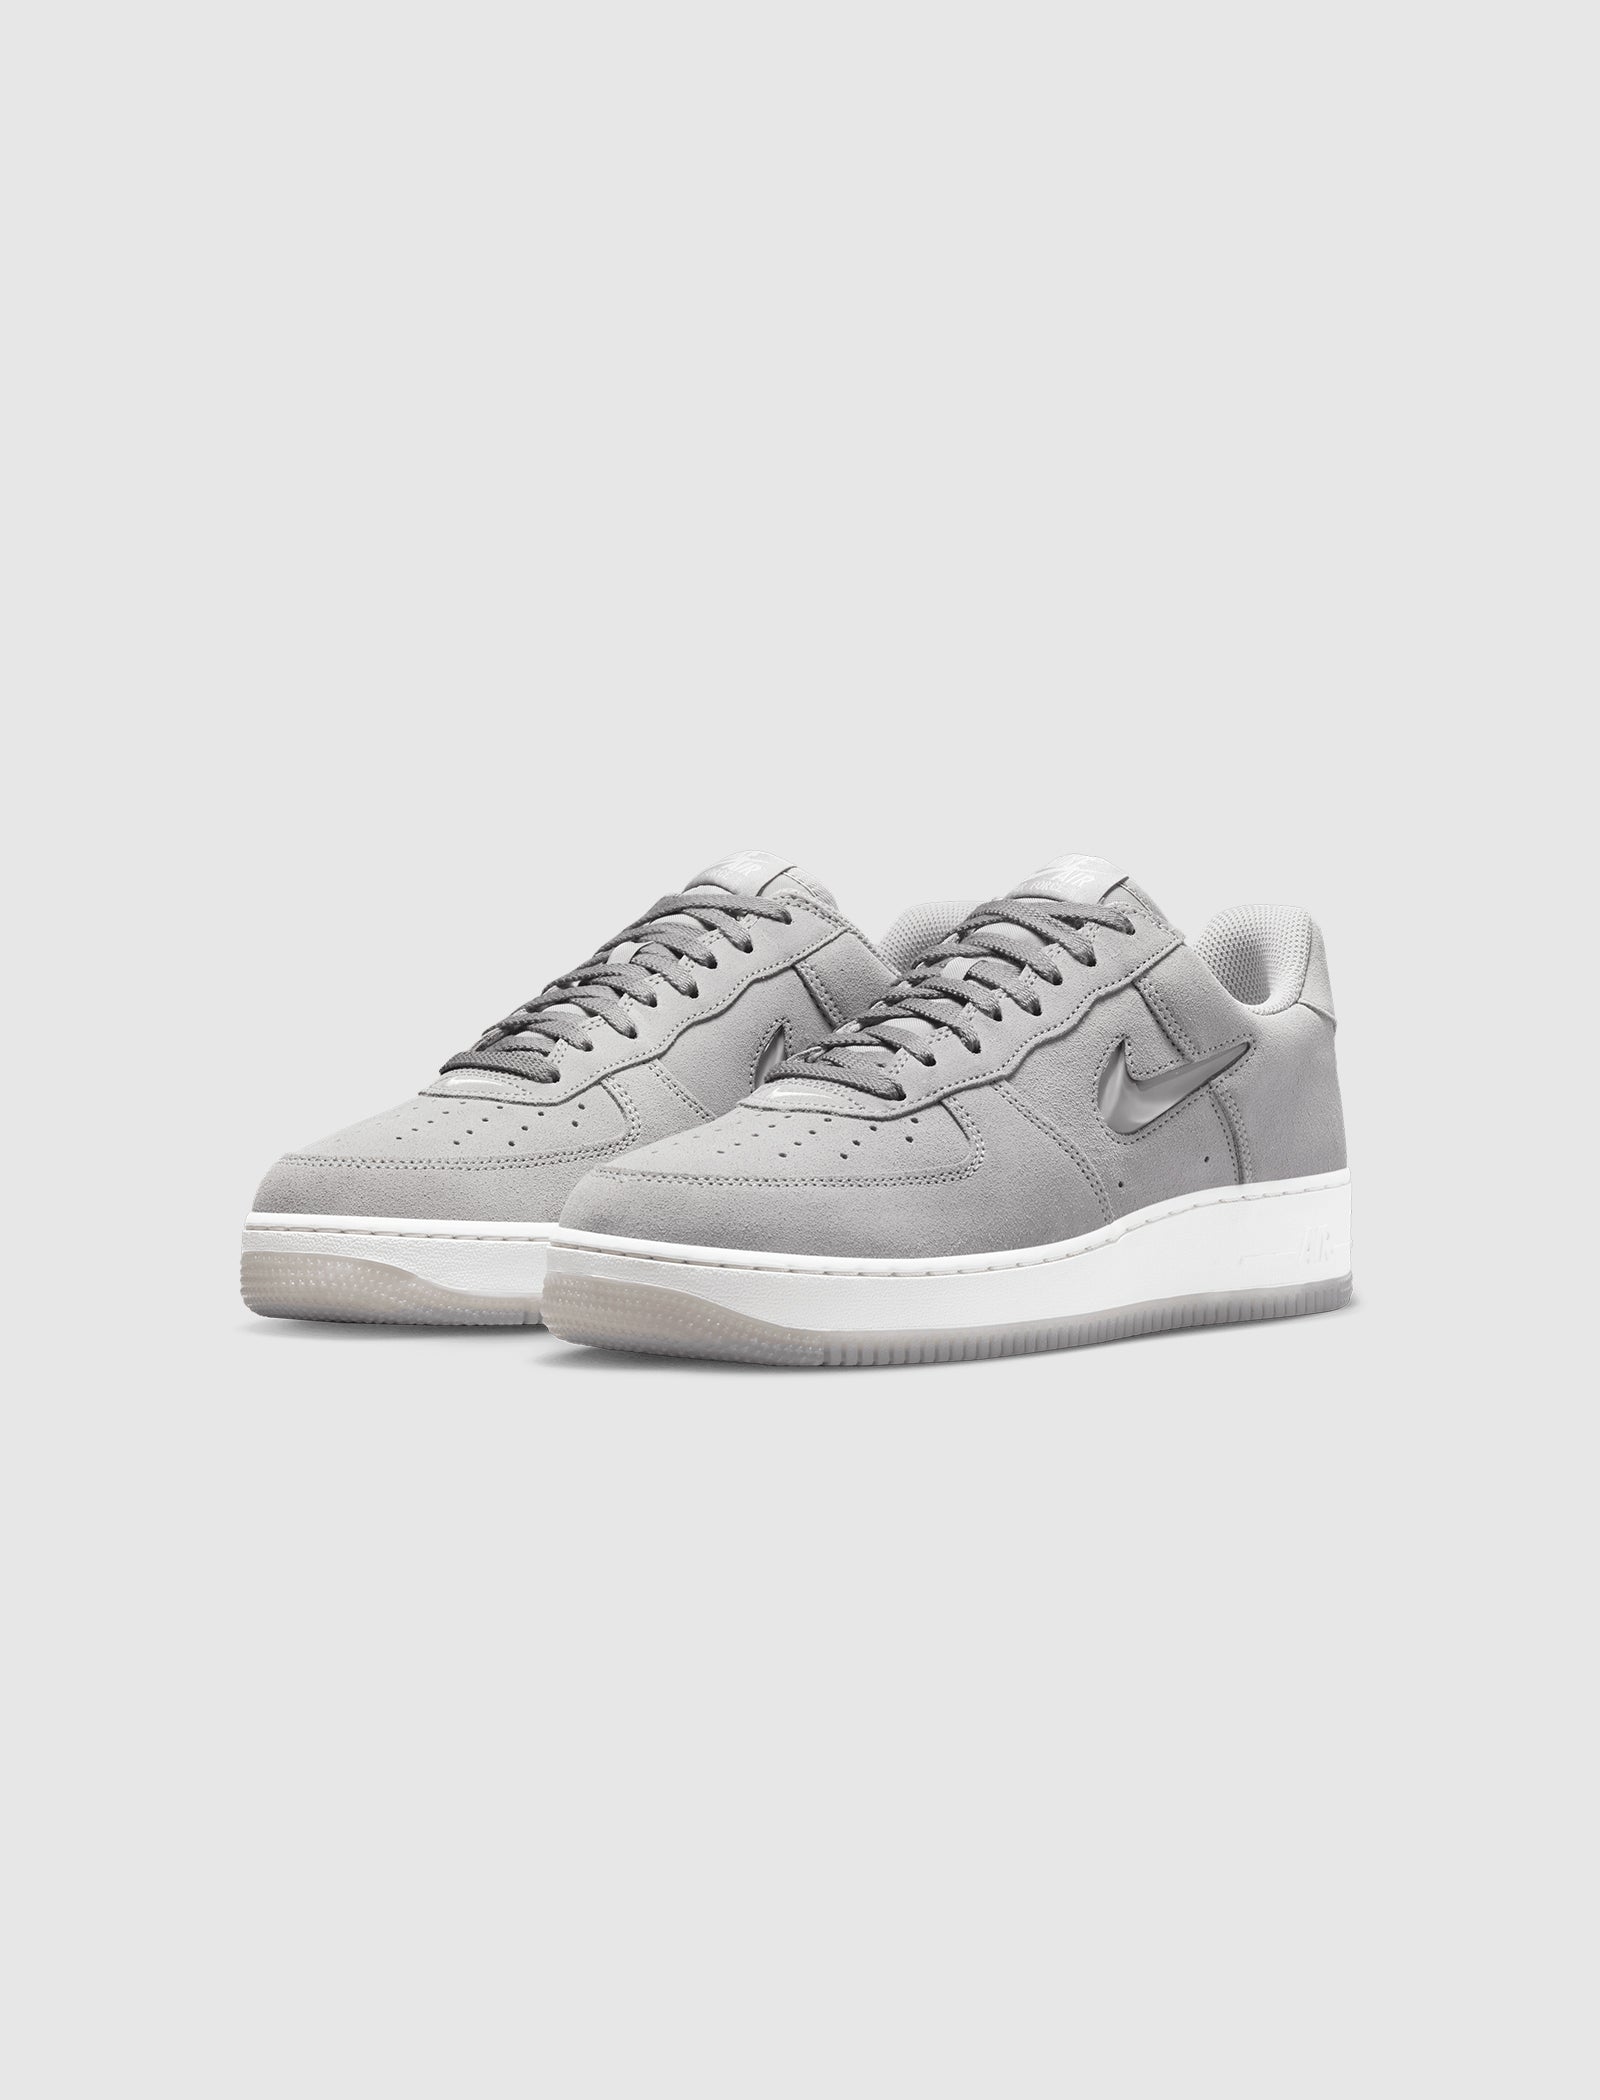 AIR FORCE 1 LOW RETRO COLOR OF THE MONTH "LIGHT SMOKE GREY"